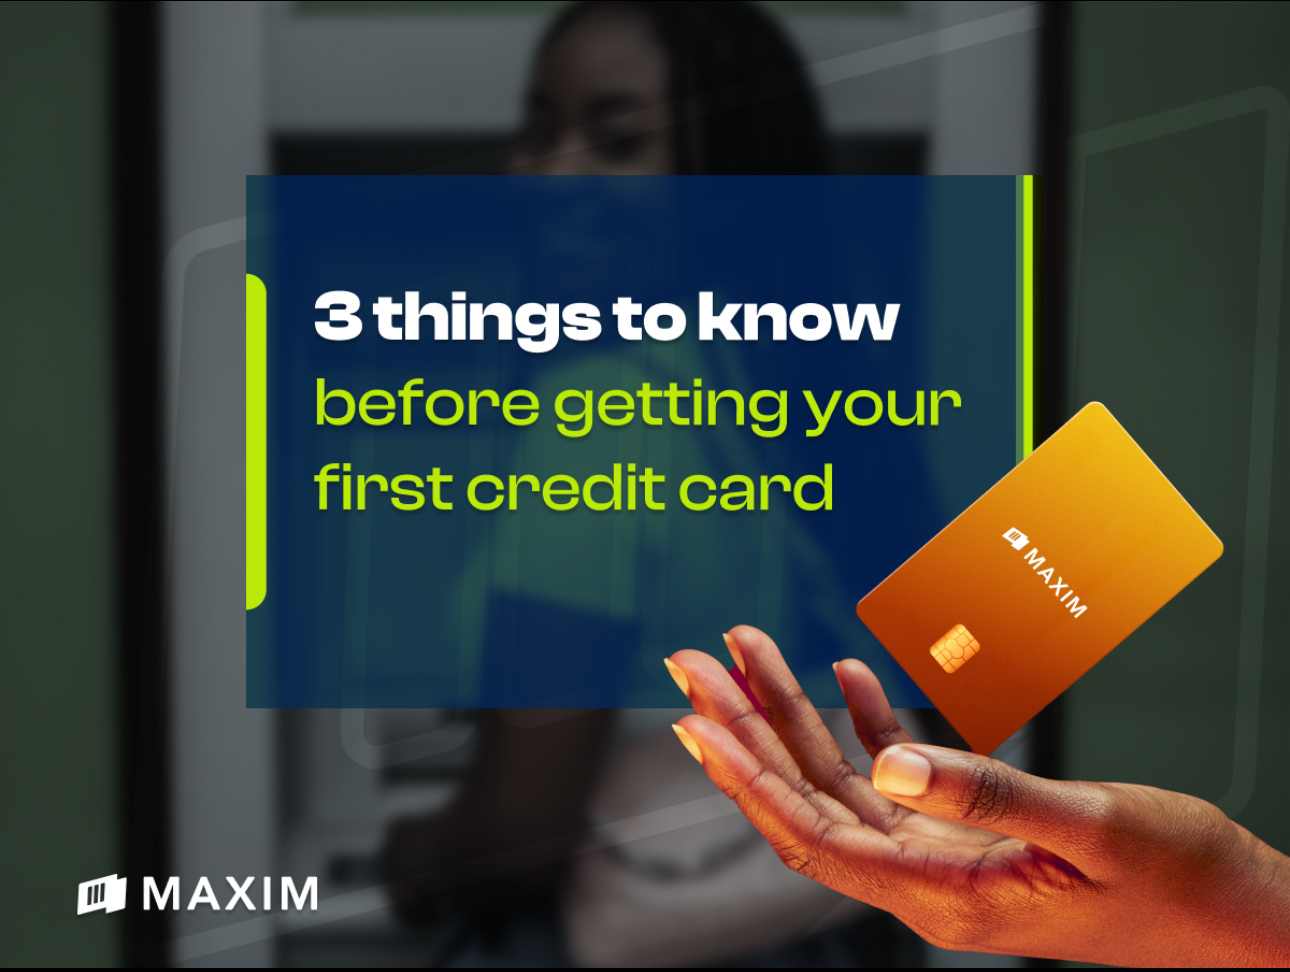 3 things to know before getting your first credit card